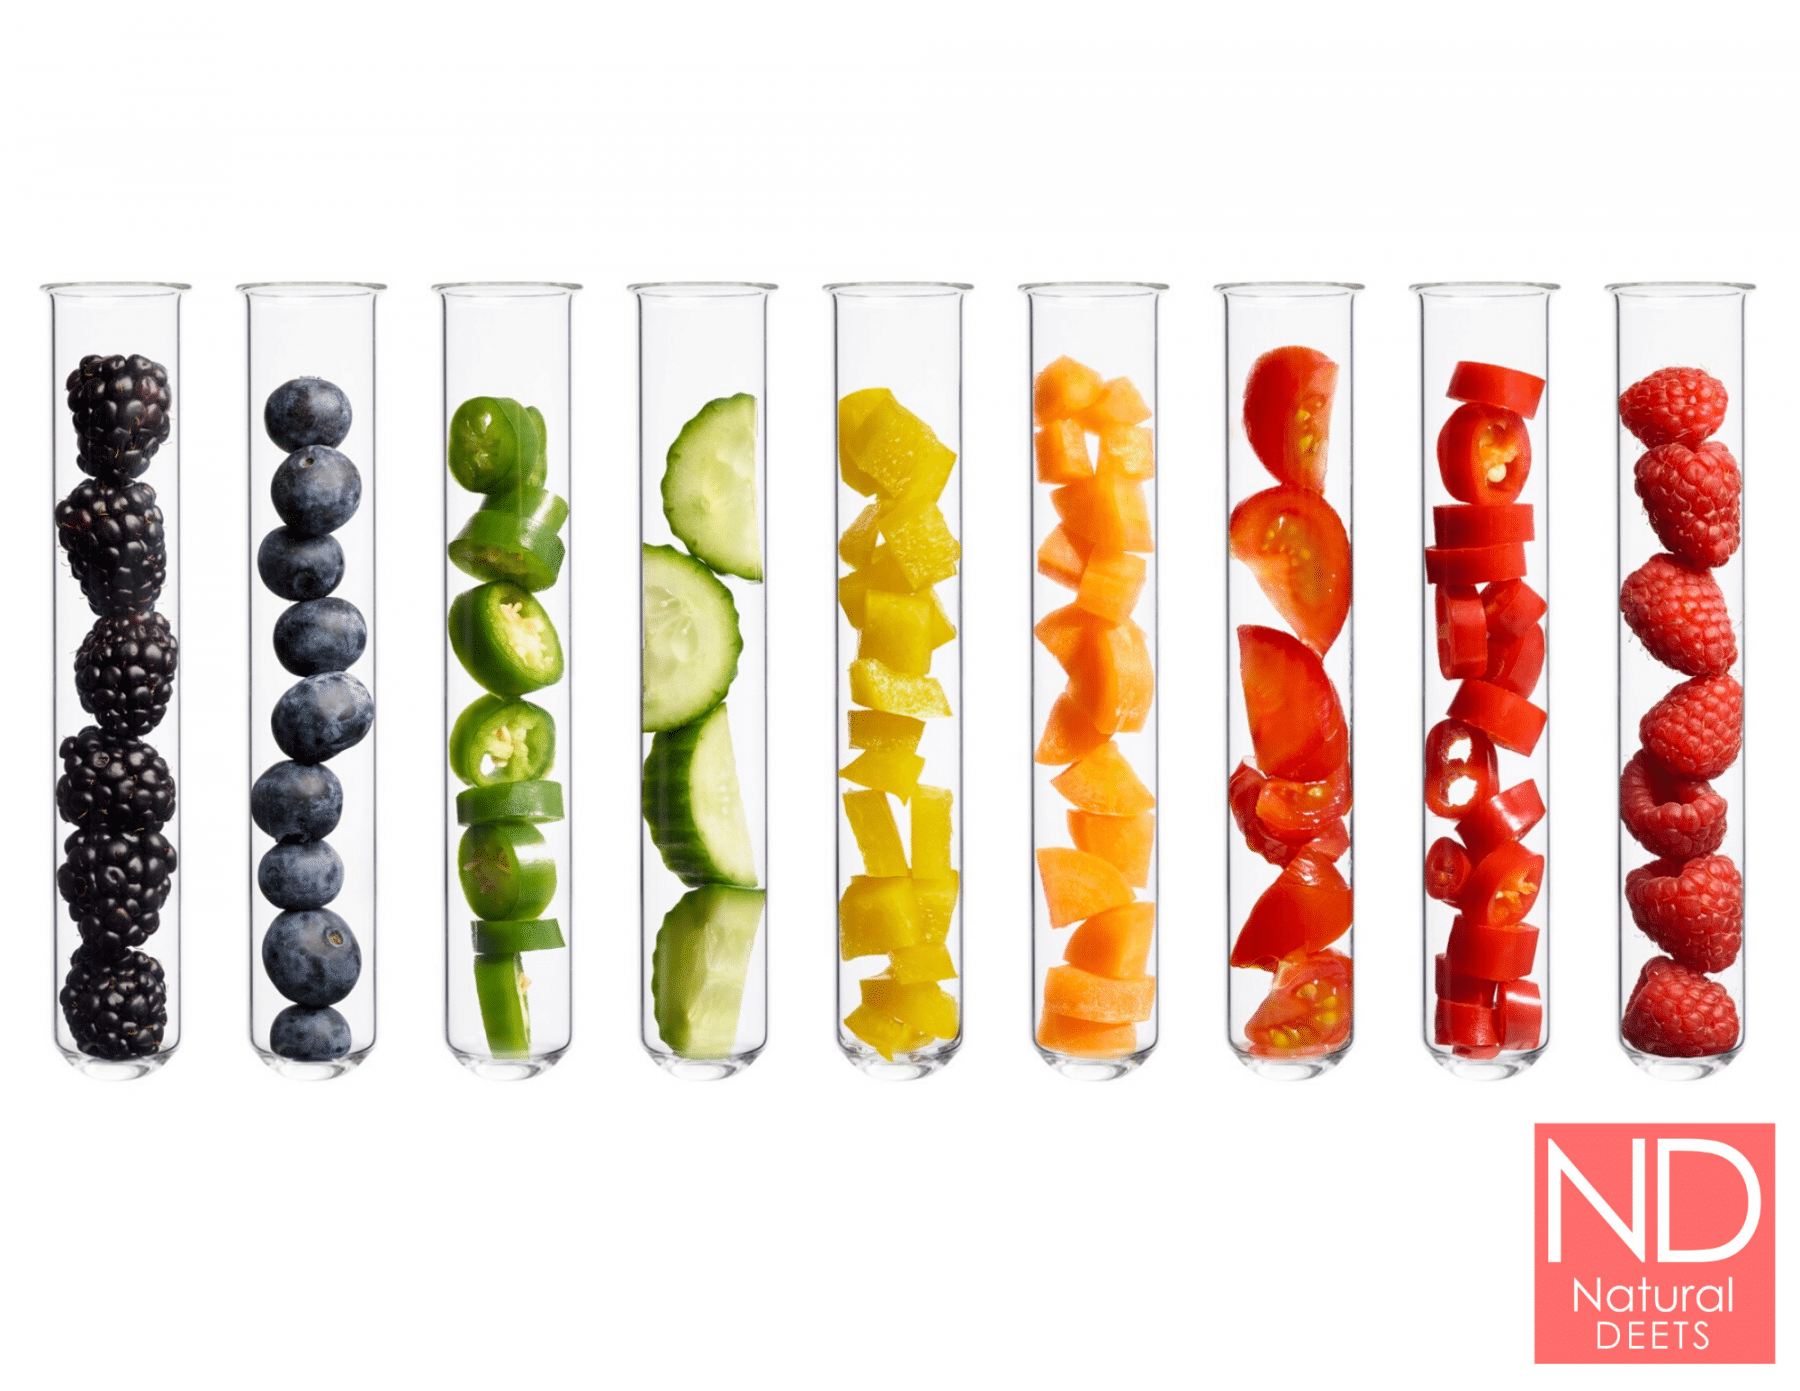 a picture of different colored fruits and vegetables in test tubes